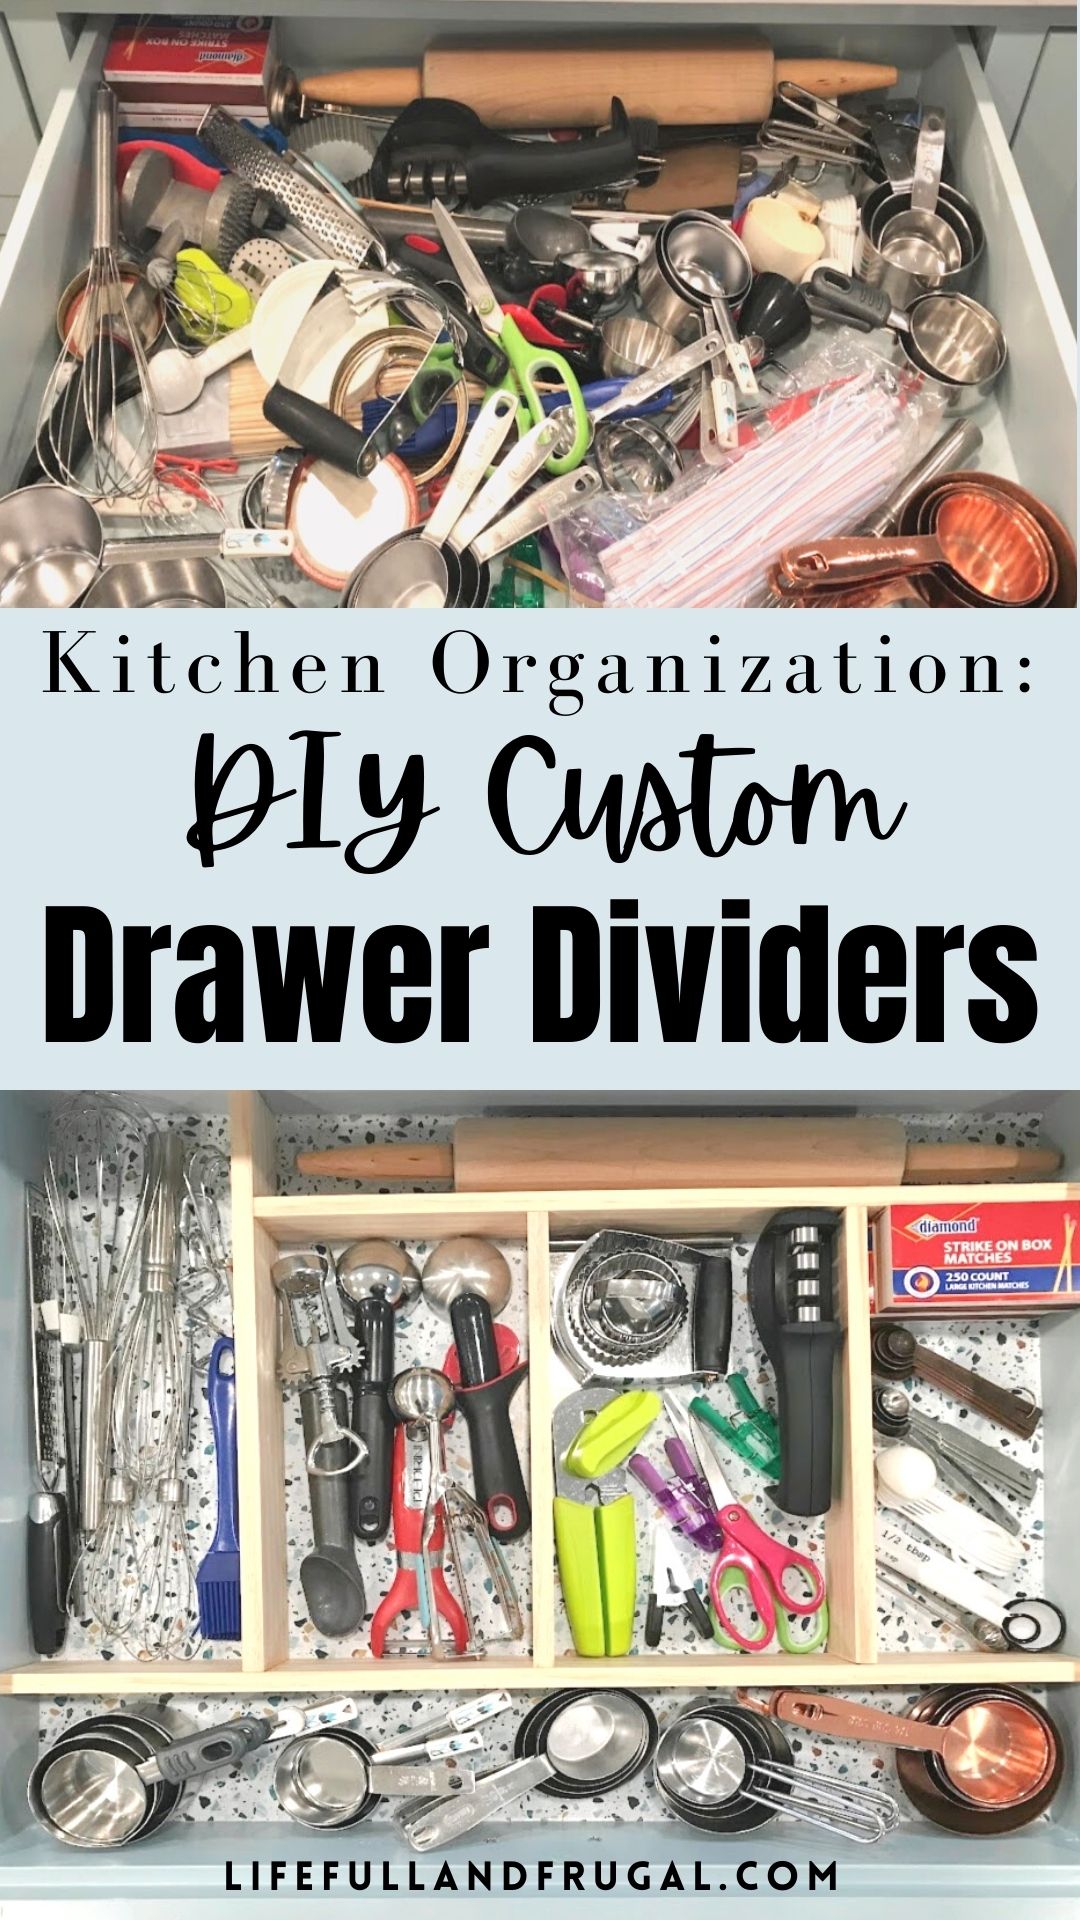 before and after pictures of a kitchen utensil drawer, top image is cluttered, bottom image is organized with diy custom drawer dividers - Frugal Custom Drawer Dividers - Life Full and Frugal